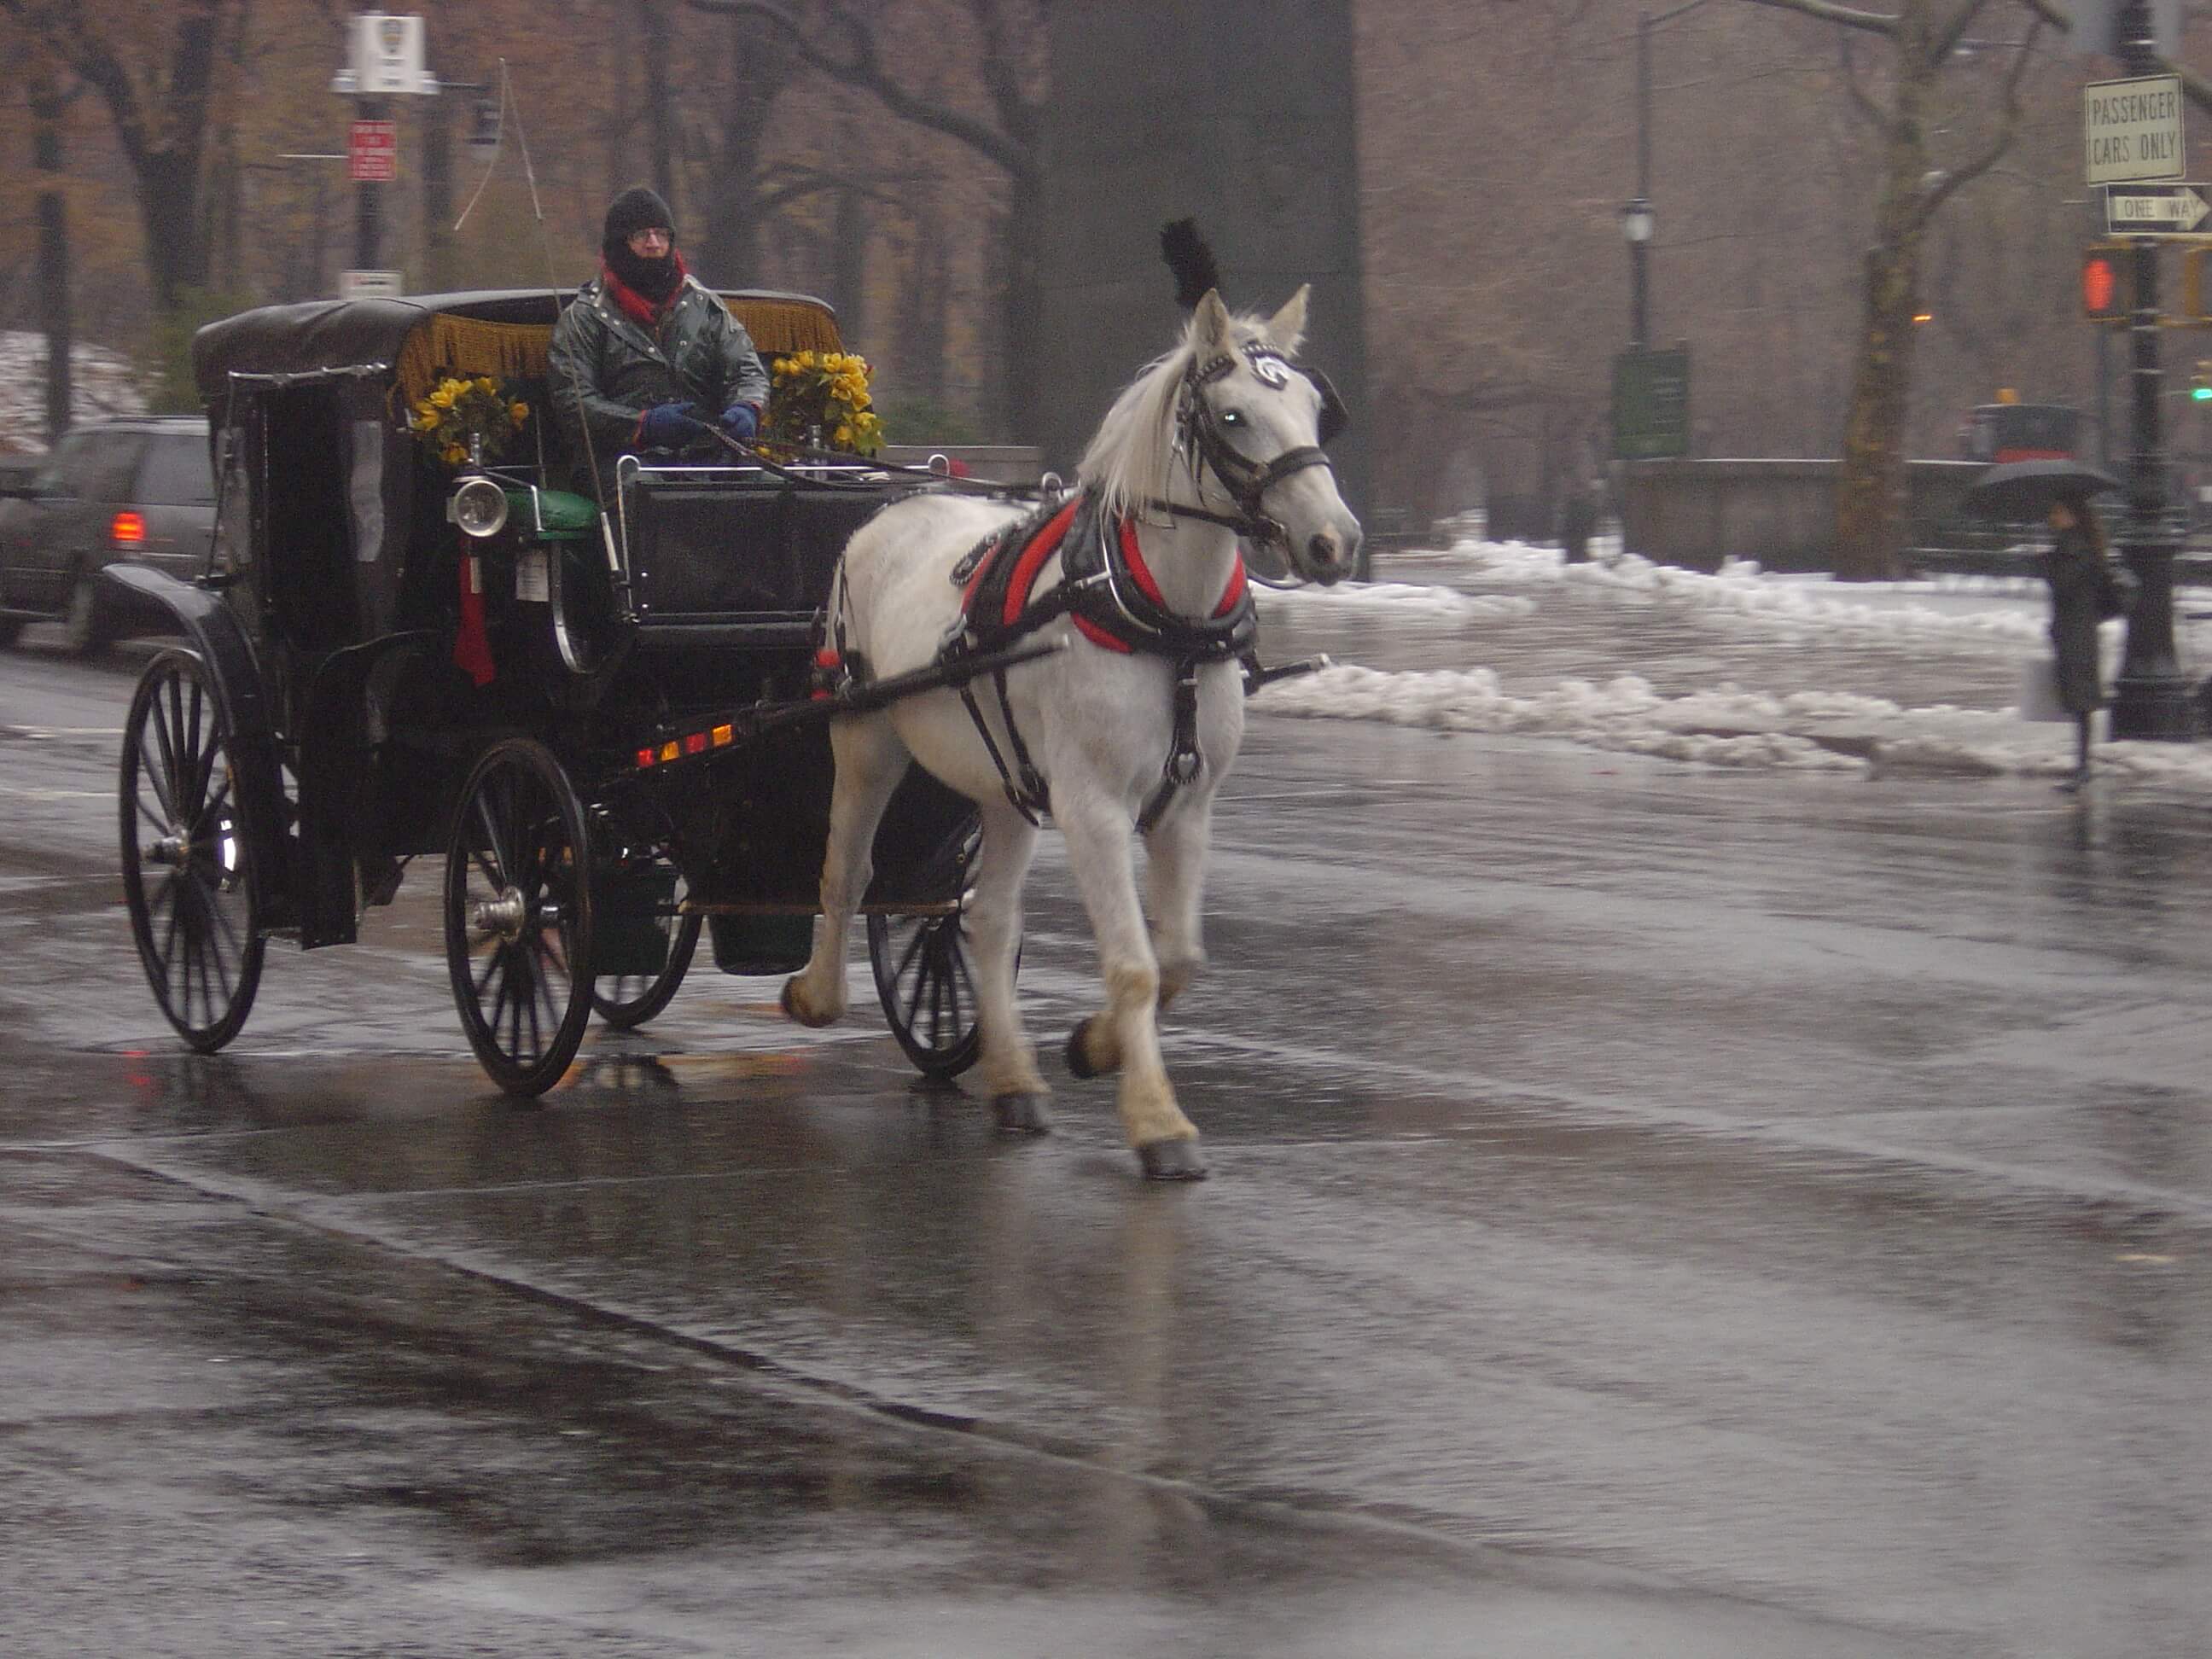 Horse Drawn Carriage on wet street